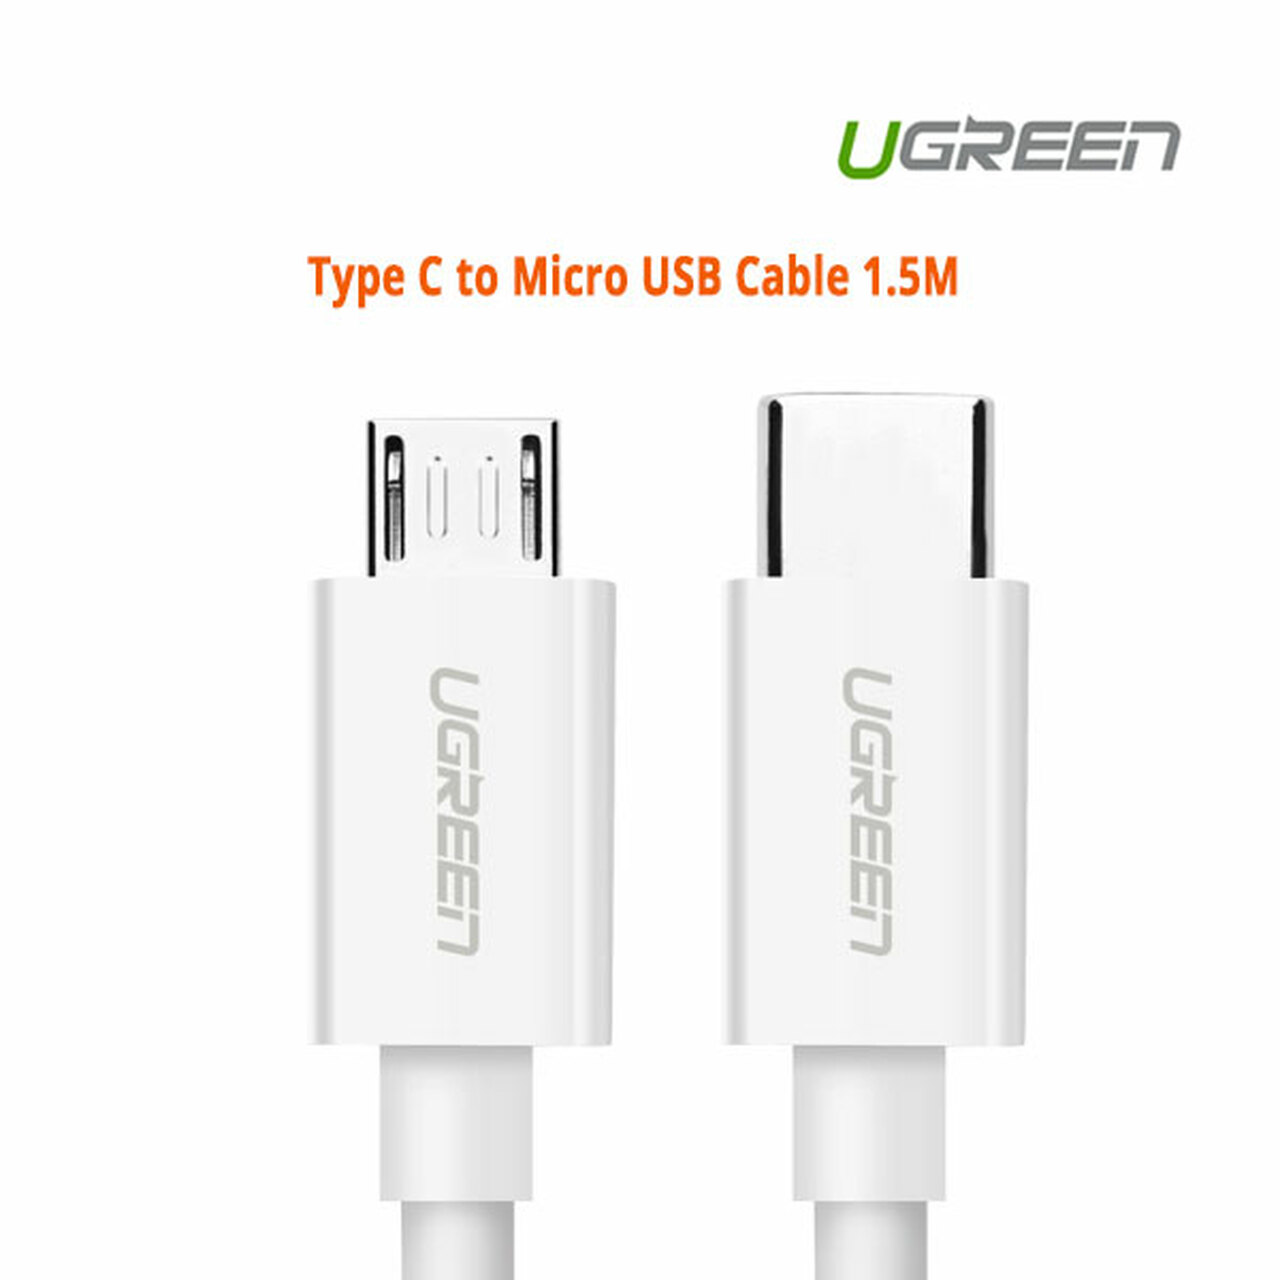  USB Type-C to Micro USB Cable 1.5M  